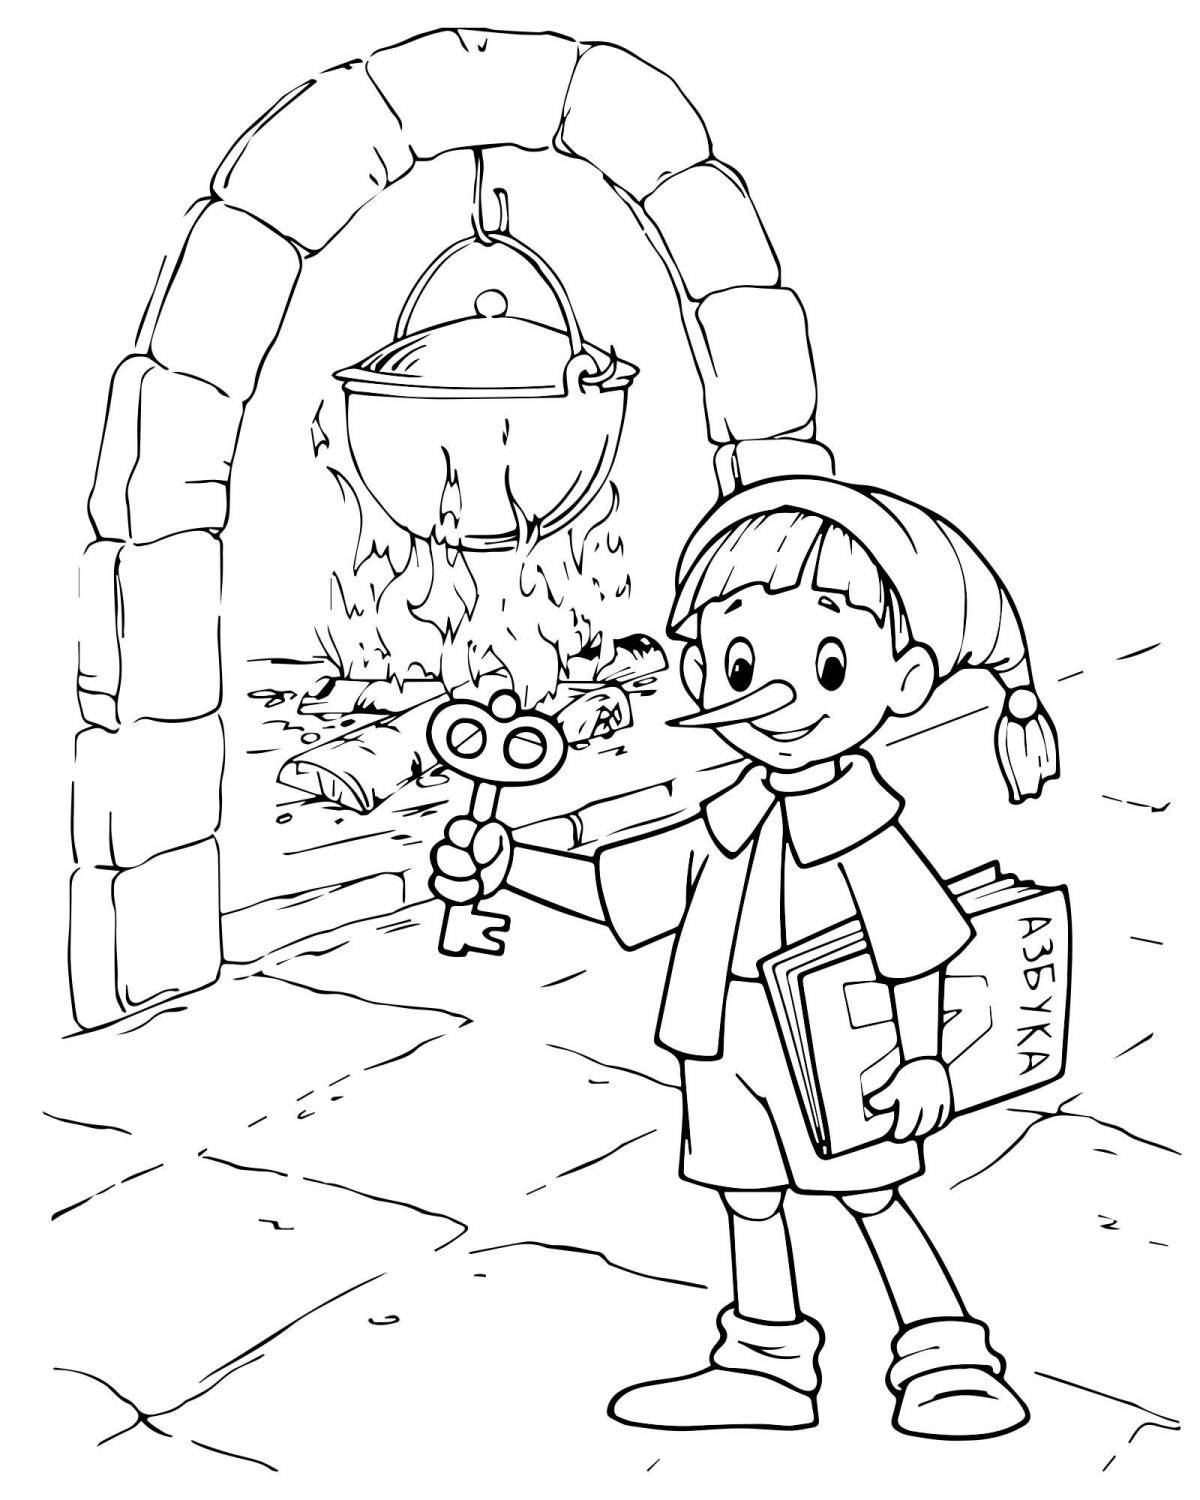 Coloring book playful pinocchio for kids